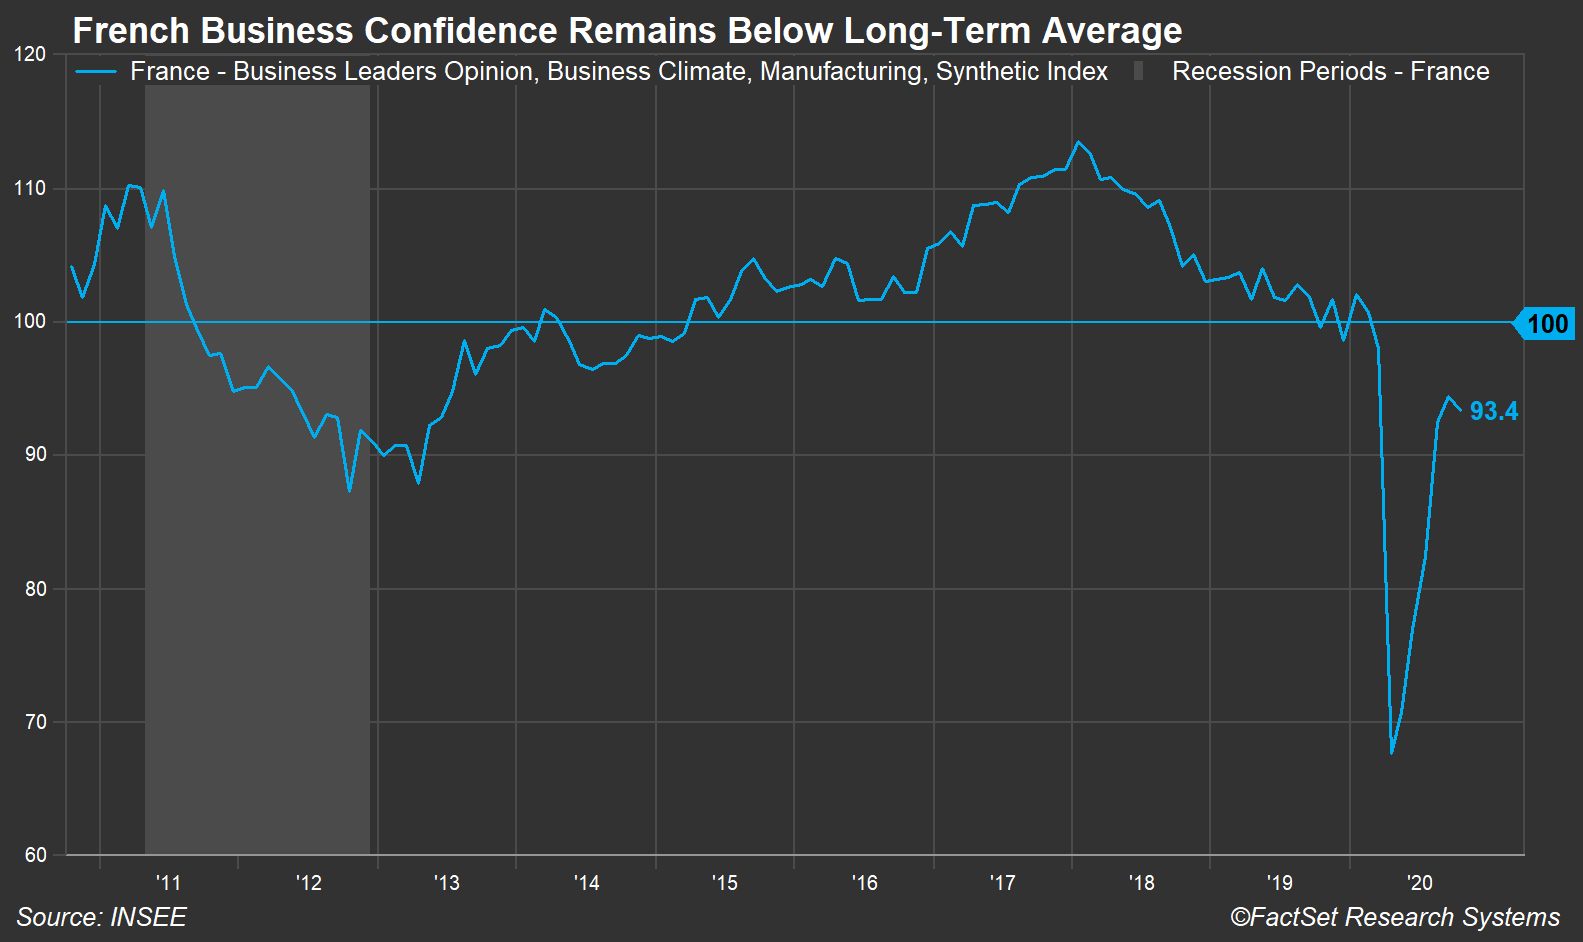 France Business Confidence